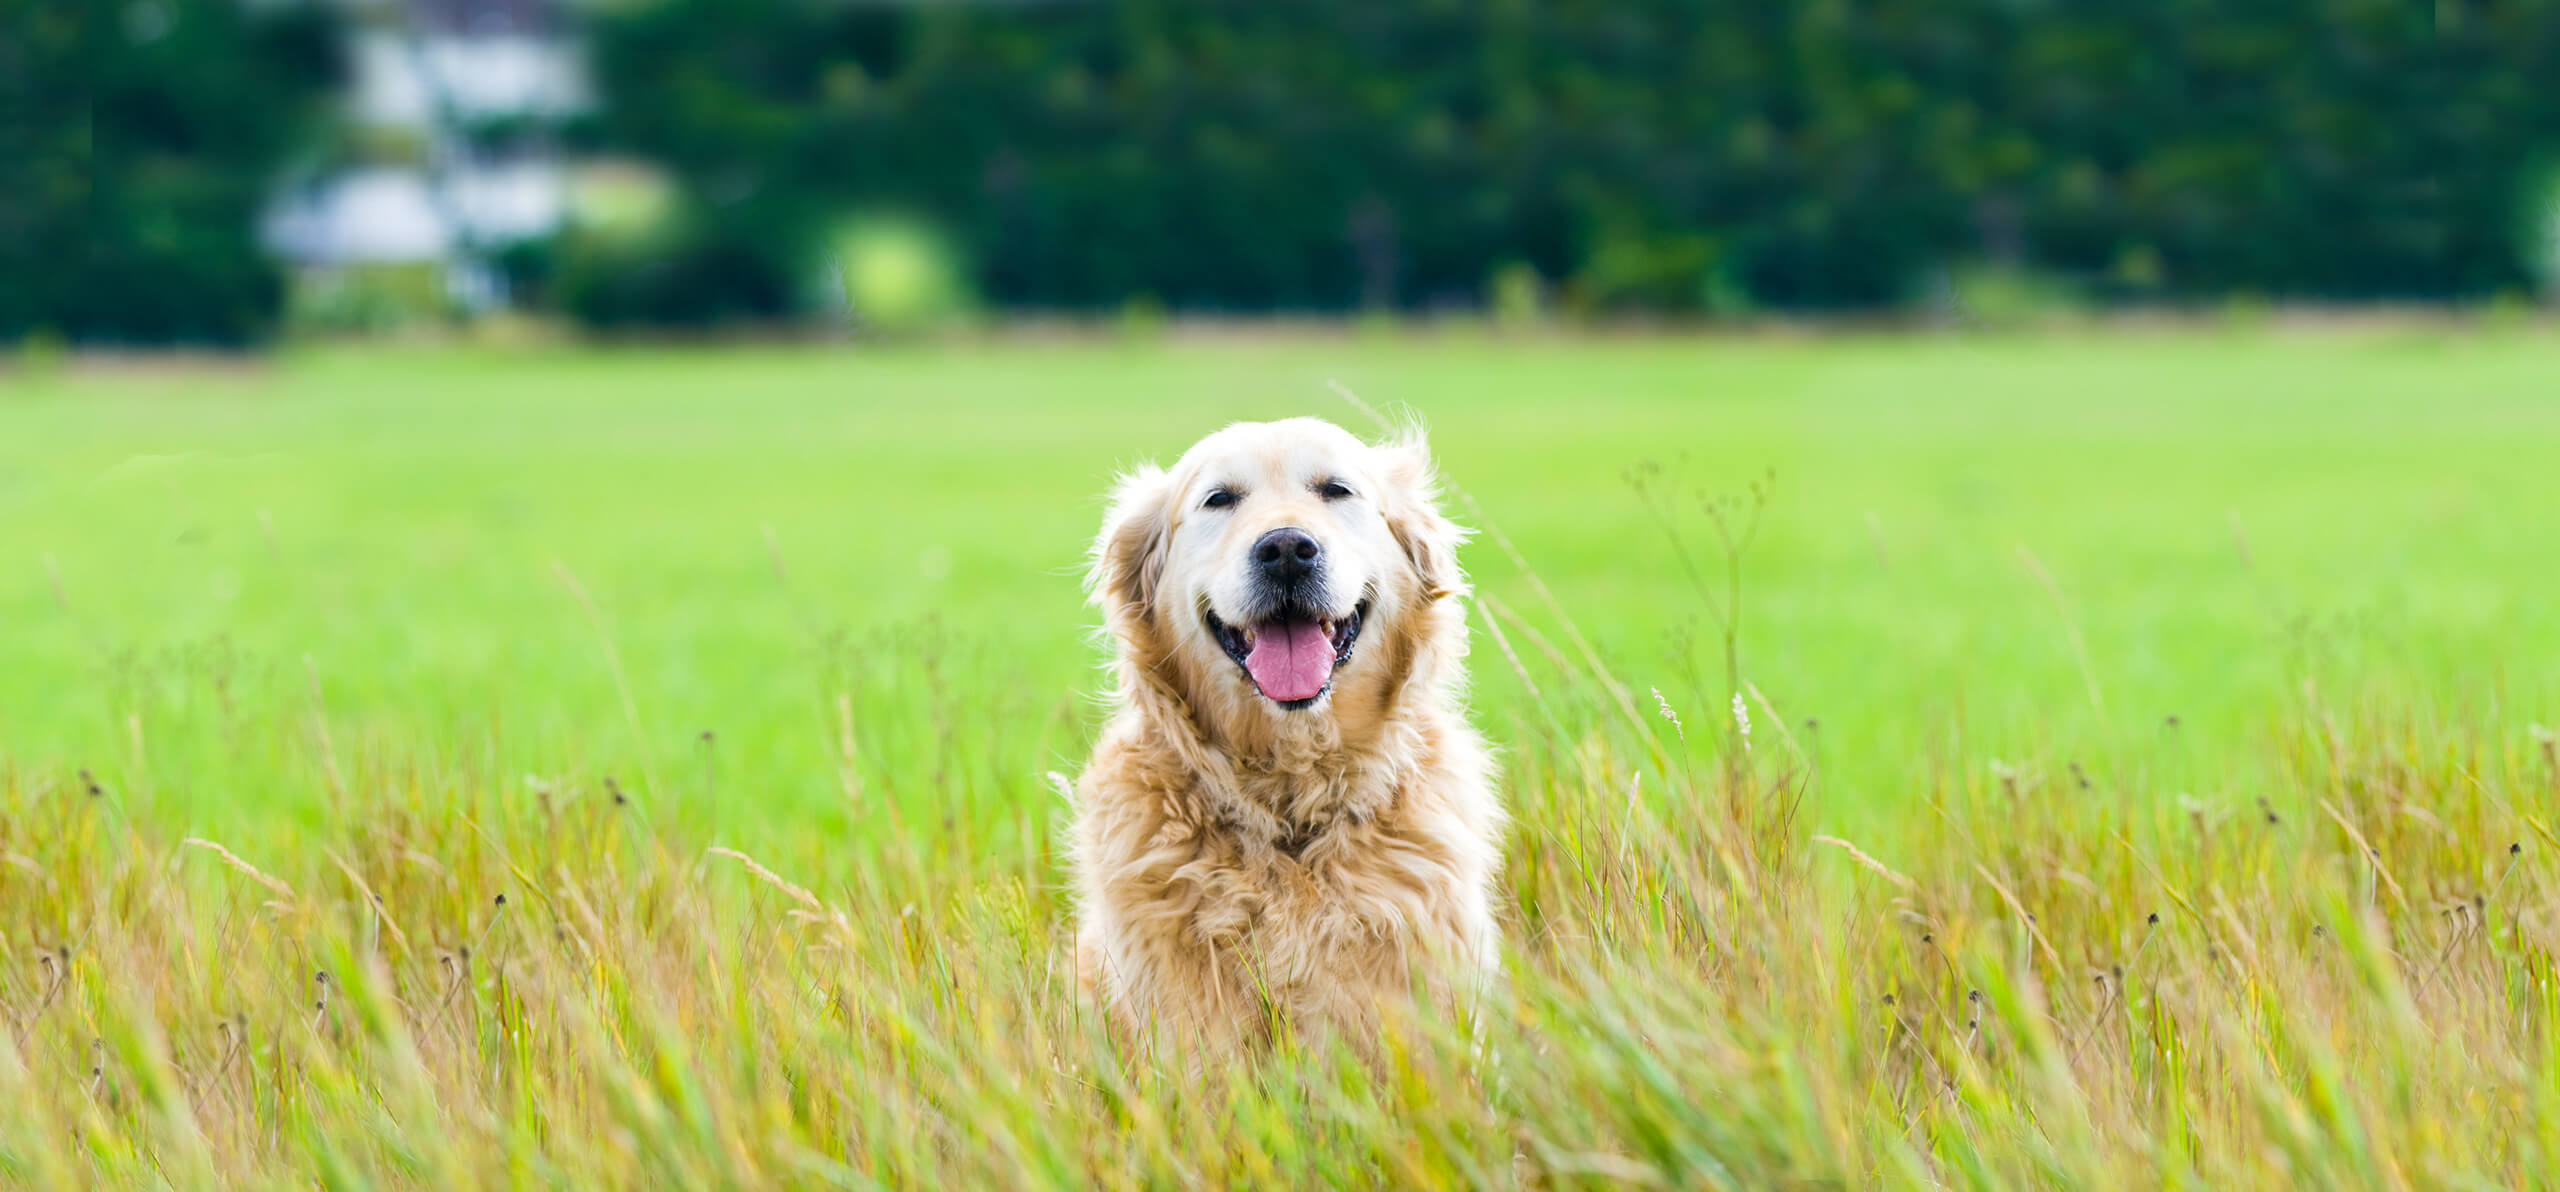 large dog smiling out of some tall grass